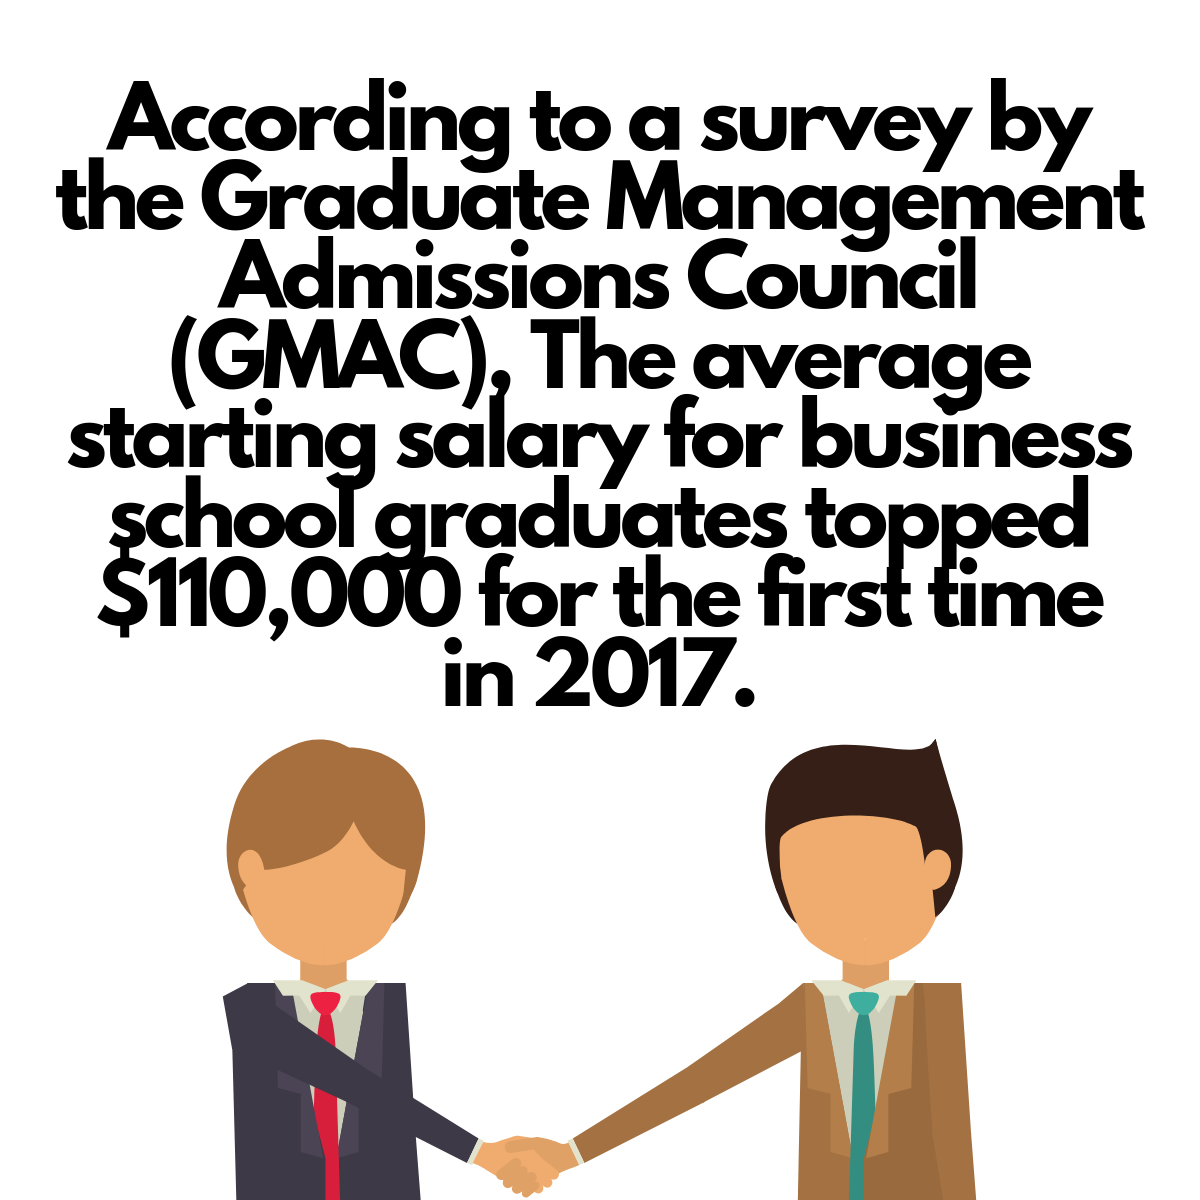 According to a survey by the Graduate Management Admissions Council (GMAC), The average starting salary for business school graduates topped $110,000 for the first time in 2017.